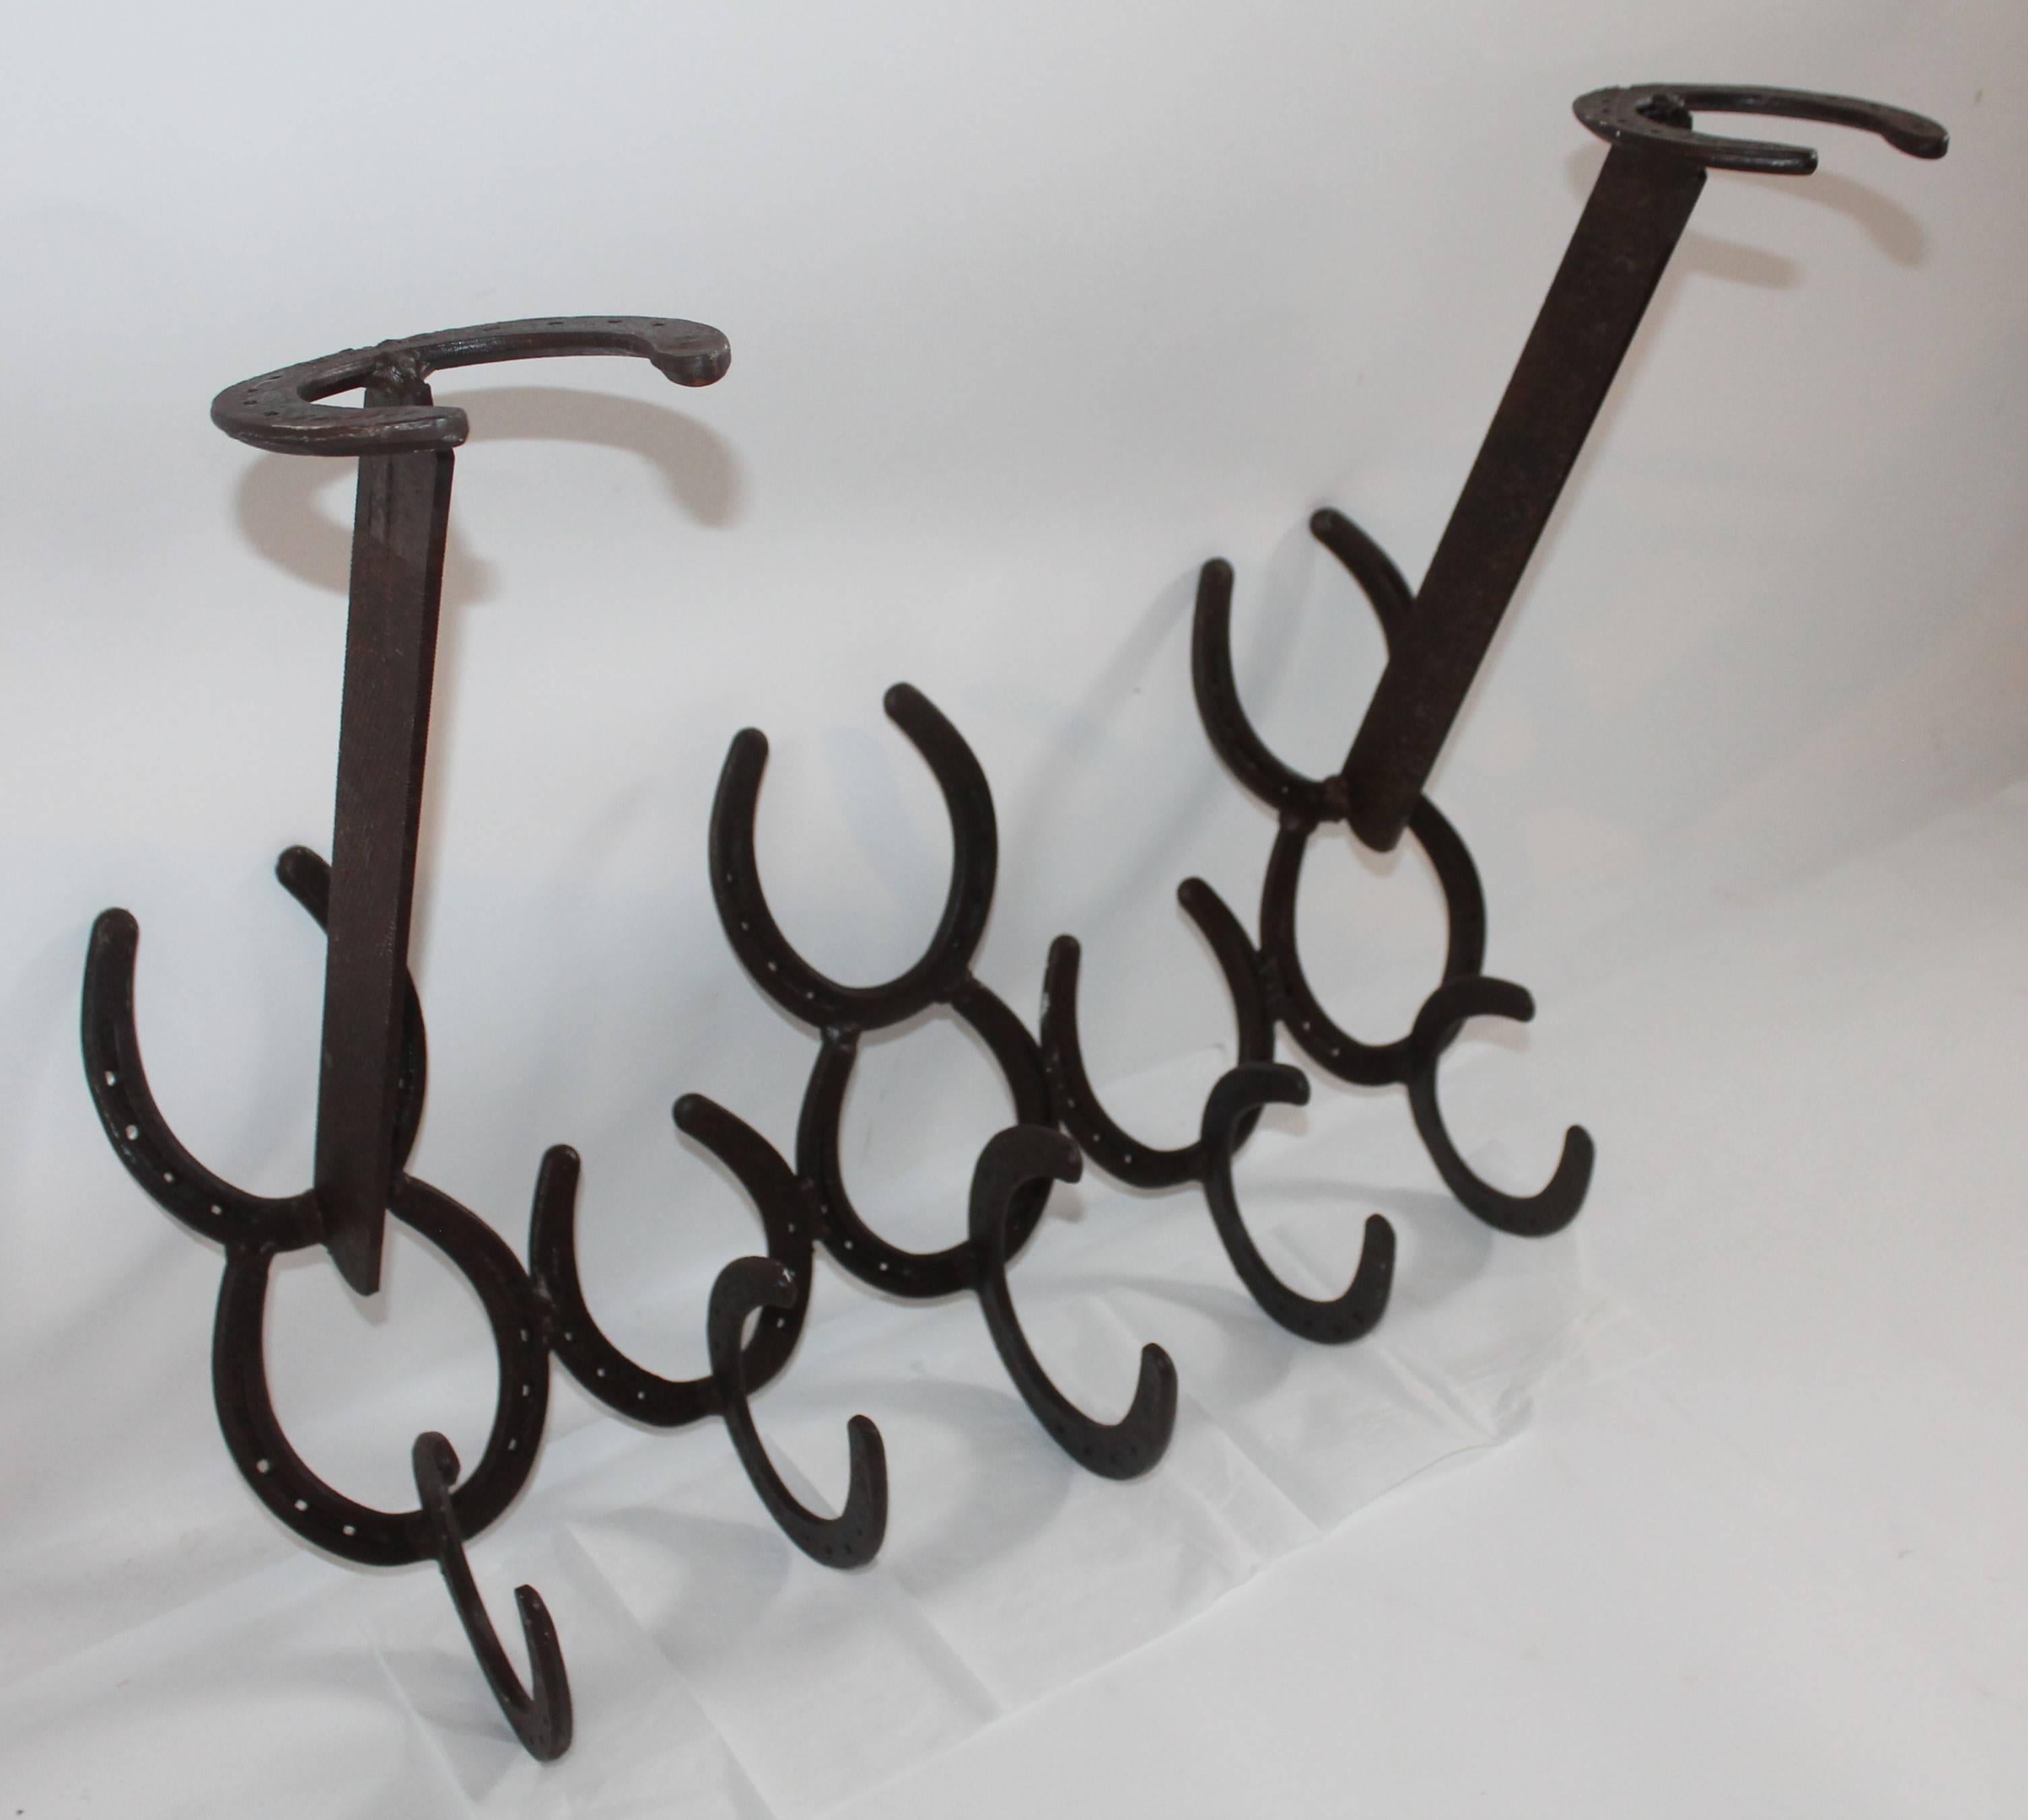 Hand-Crafted Horse Shoe Coat and Hat Rack